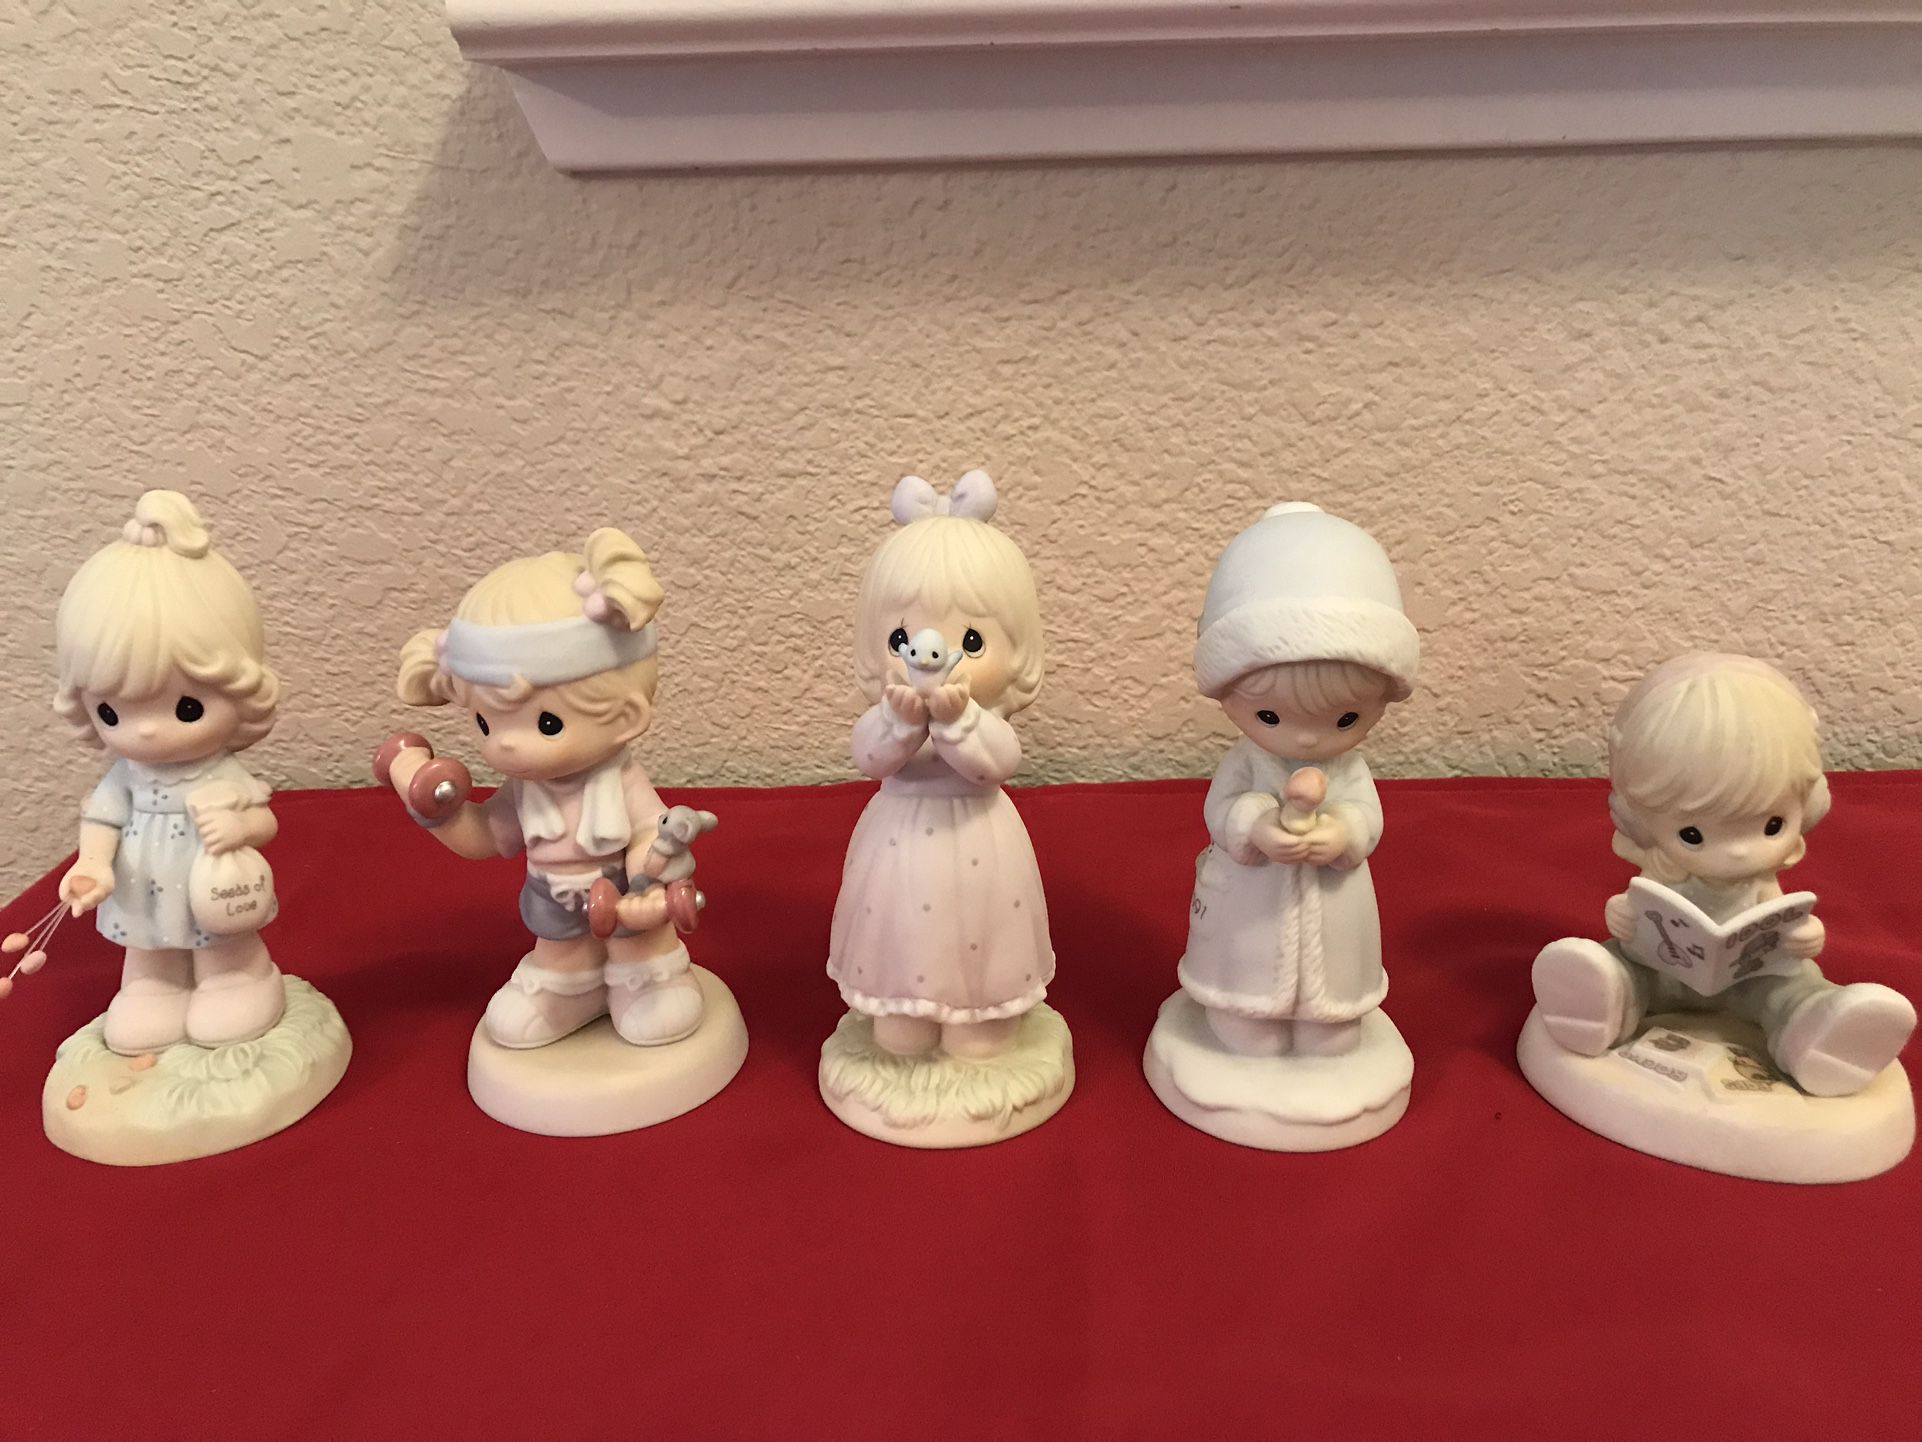 A group of 5 Vintage Precious Moments figurines